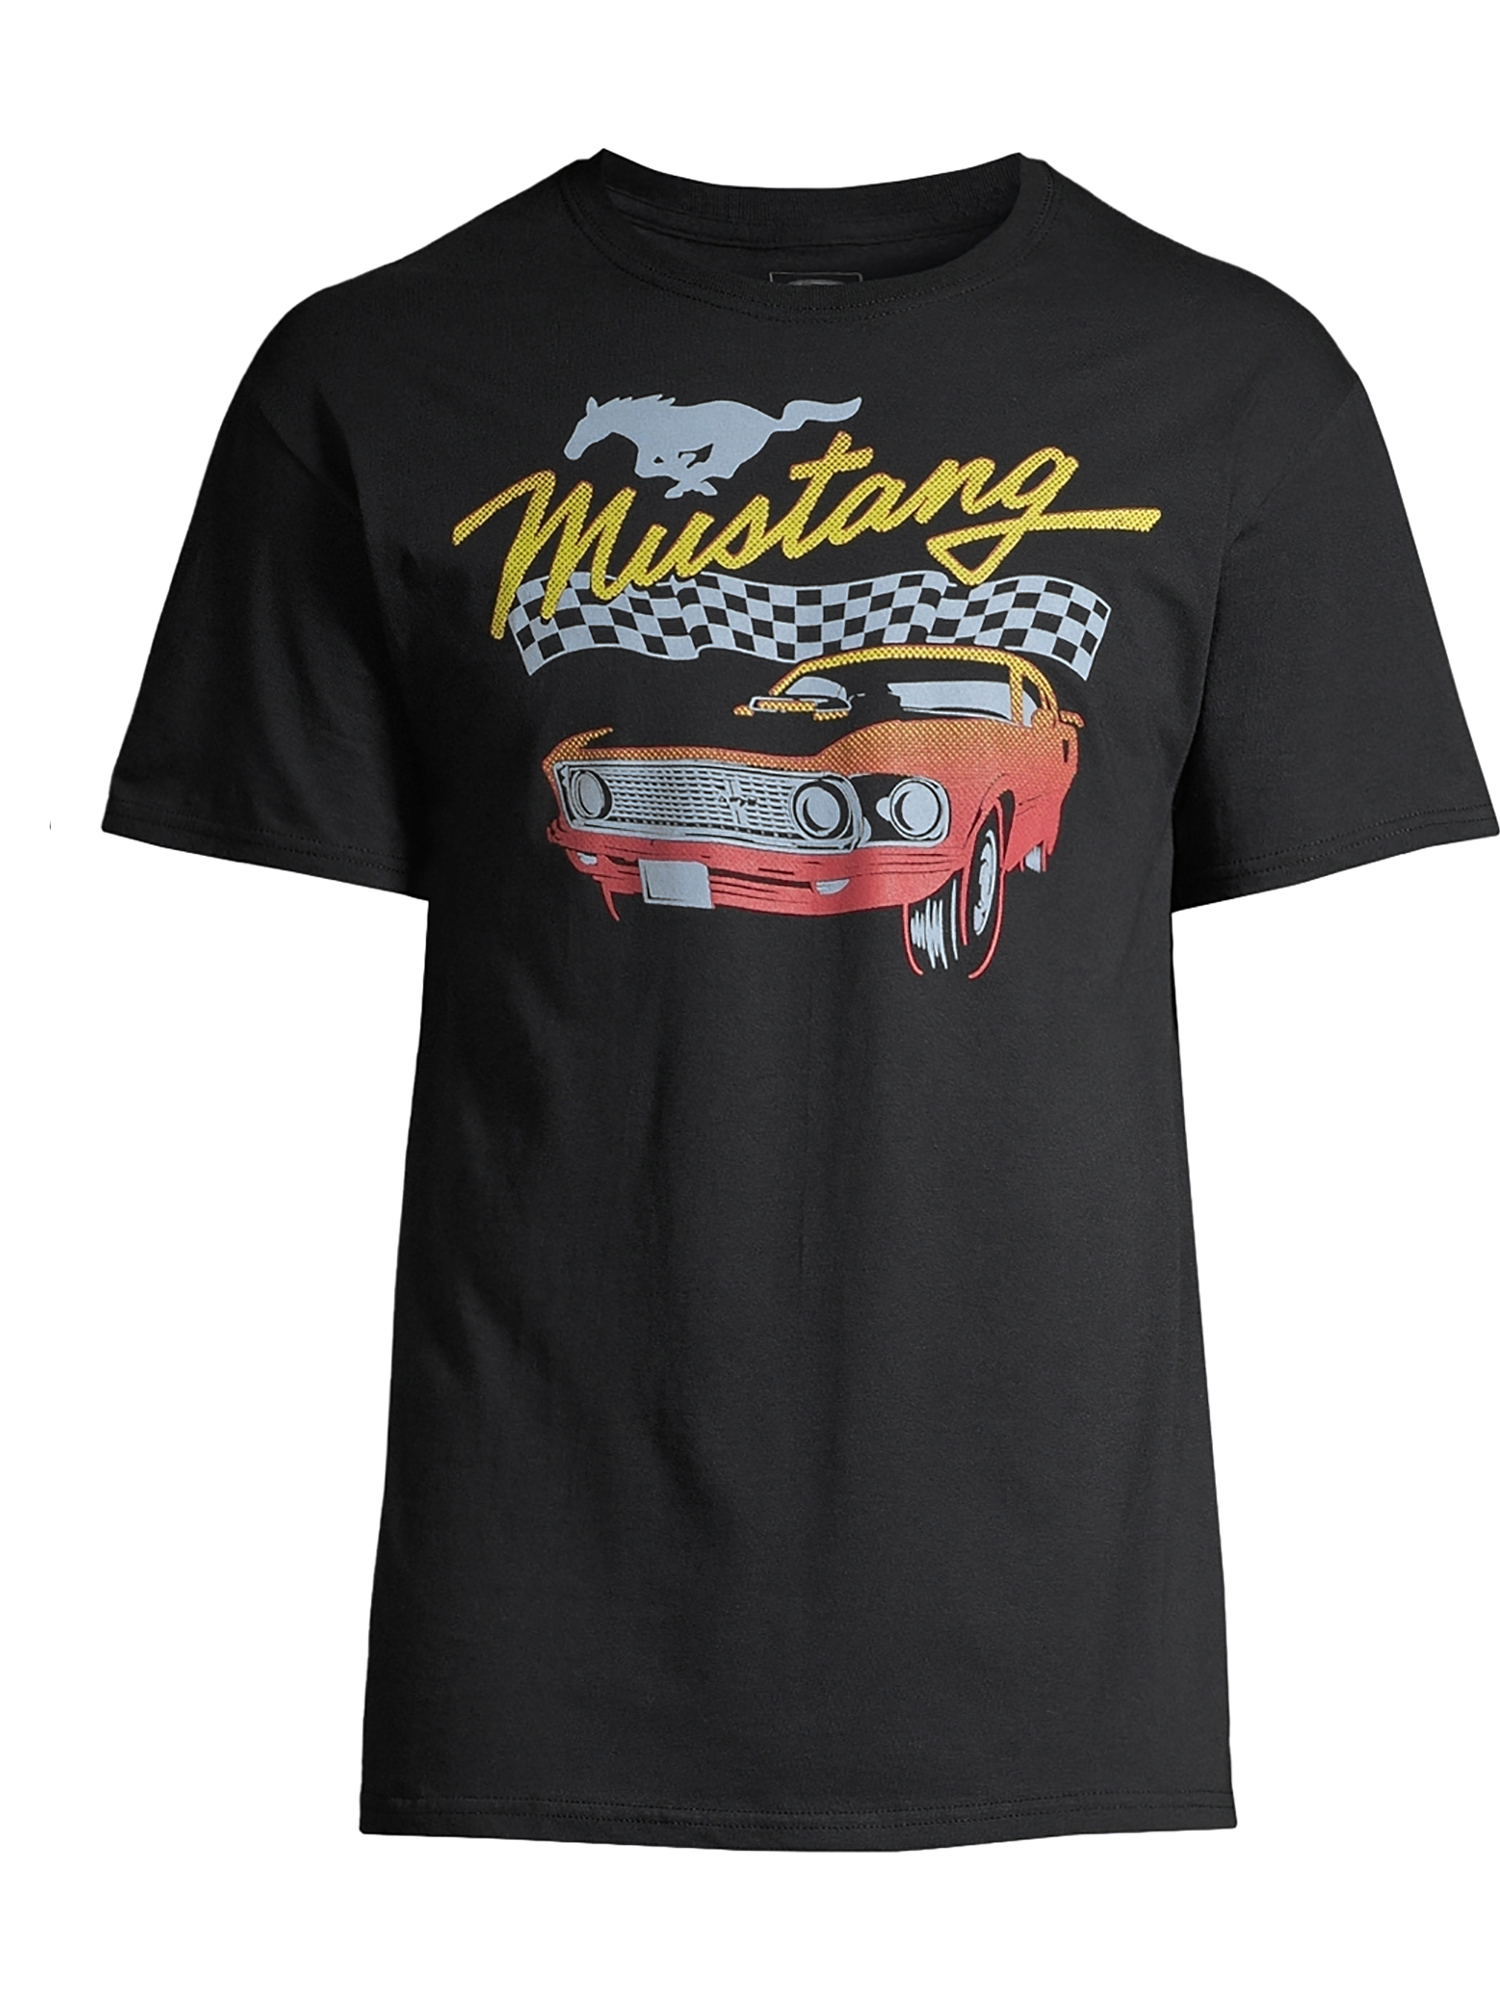 Ford Vintage Mustang & Mustang Racing Men's and Big Men's Graphic Casual T-Shirt, 2-Pack - image 3 of 11